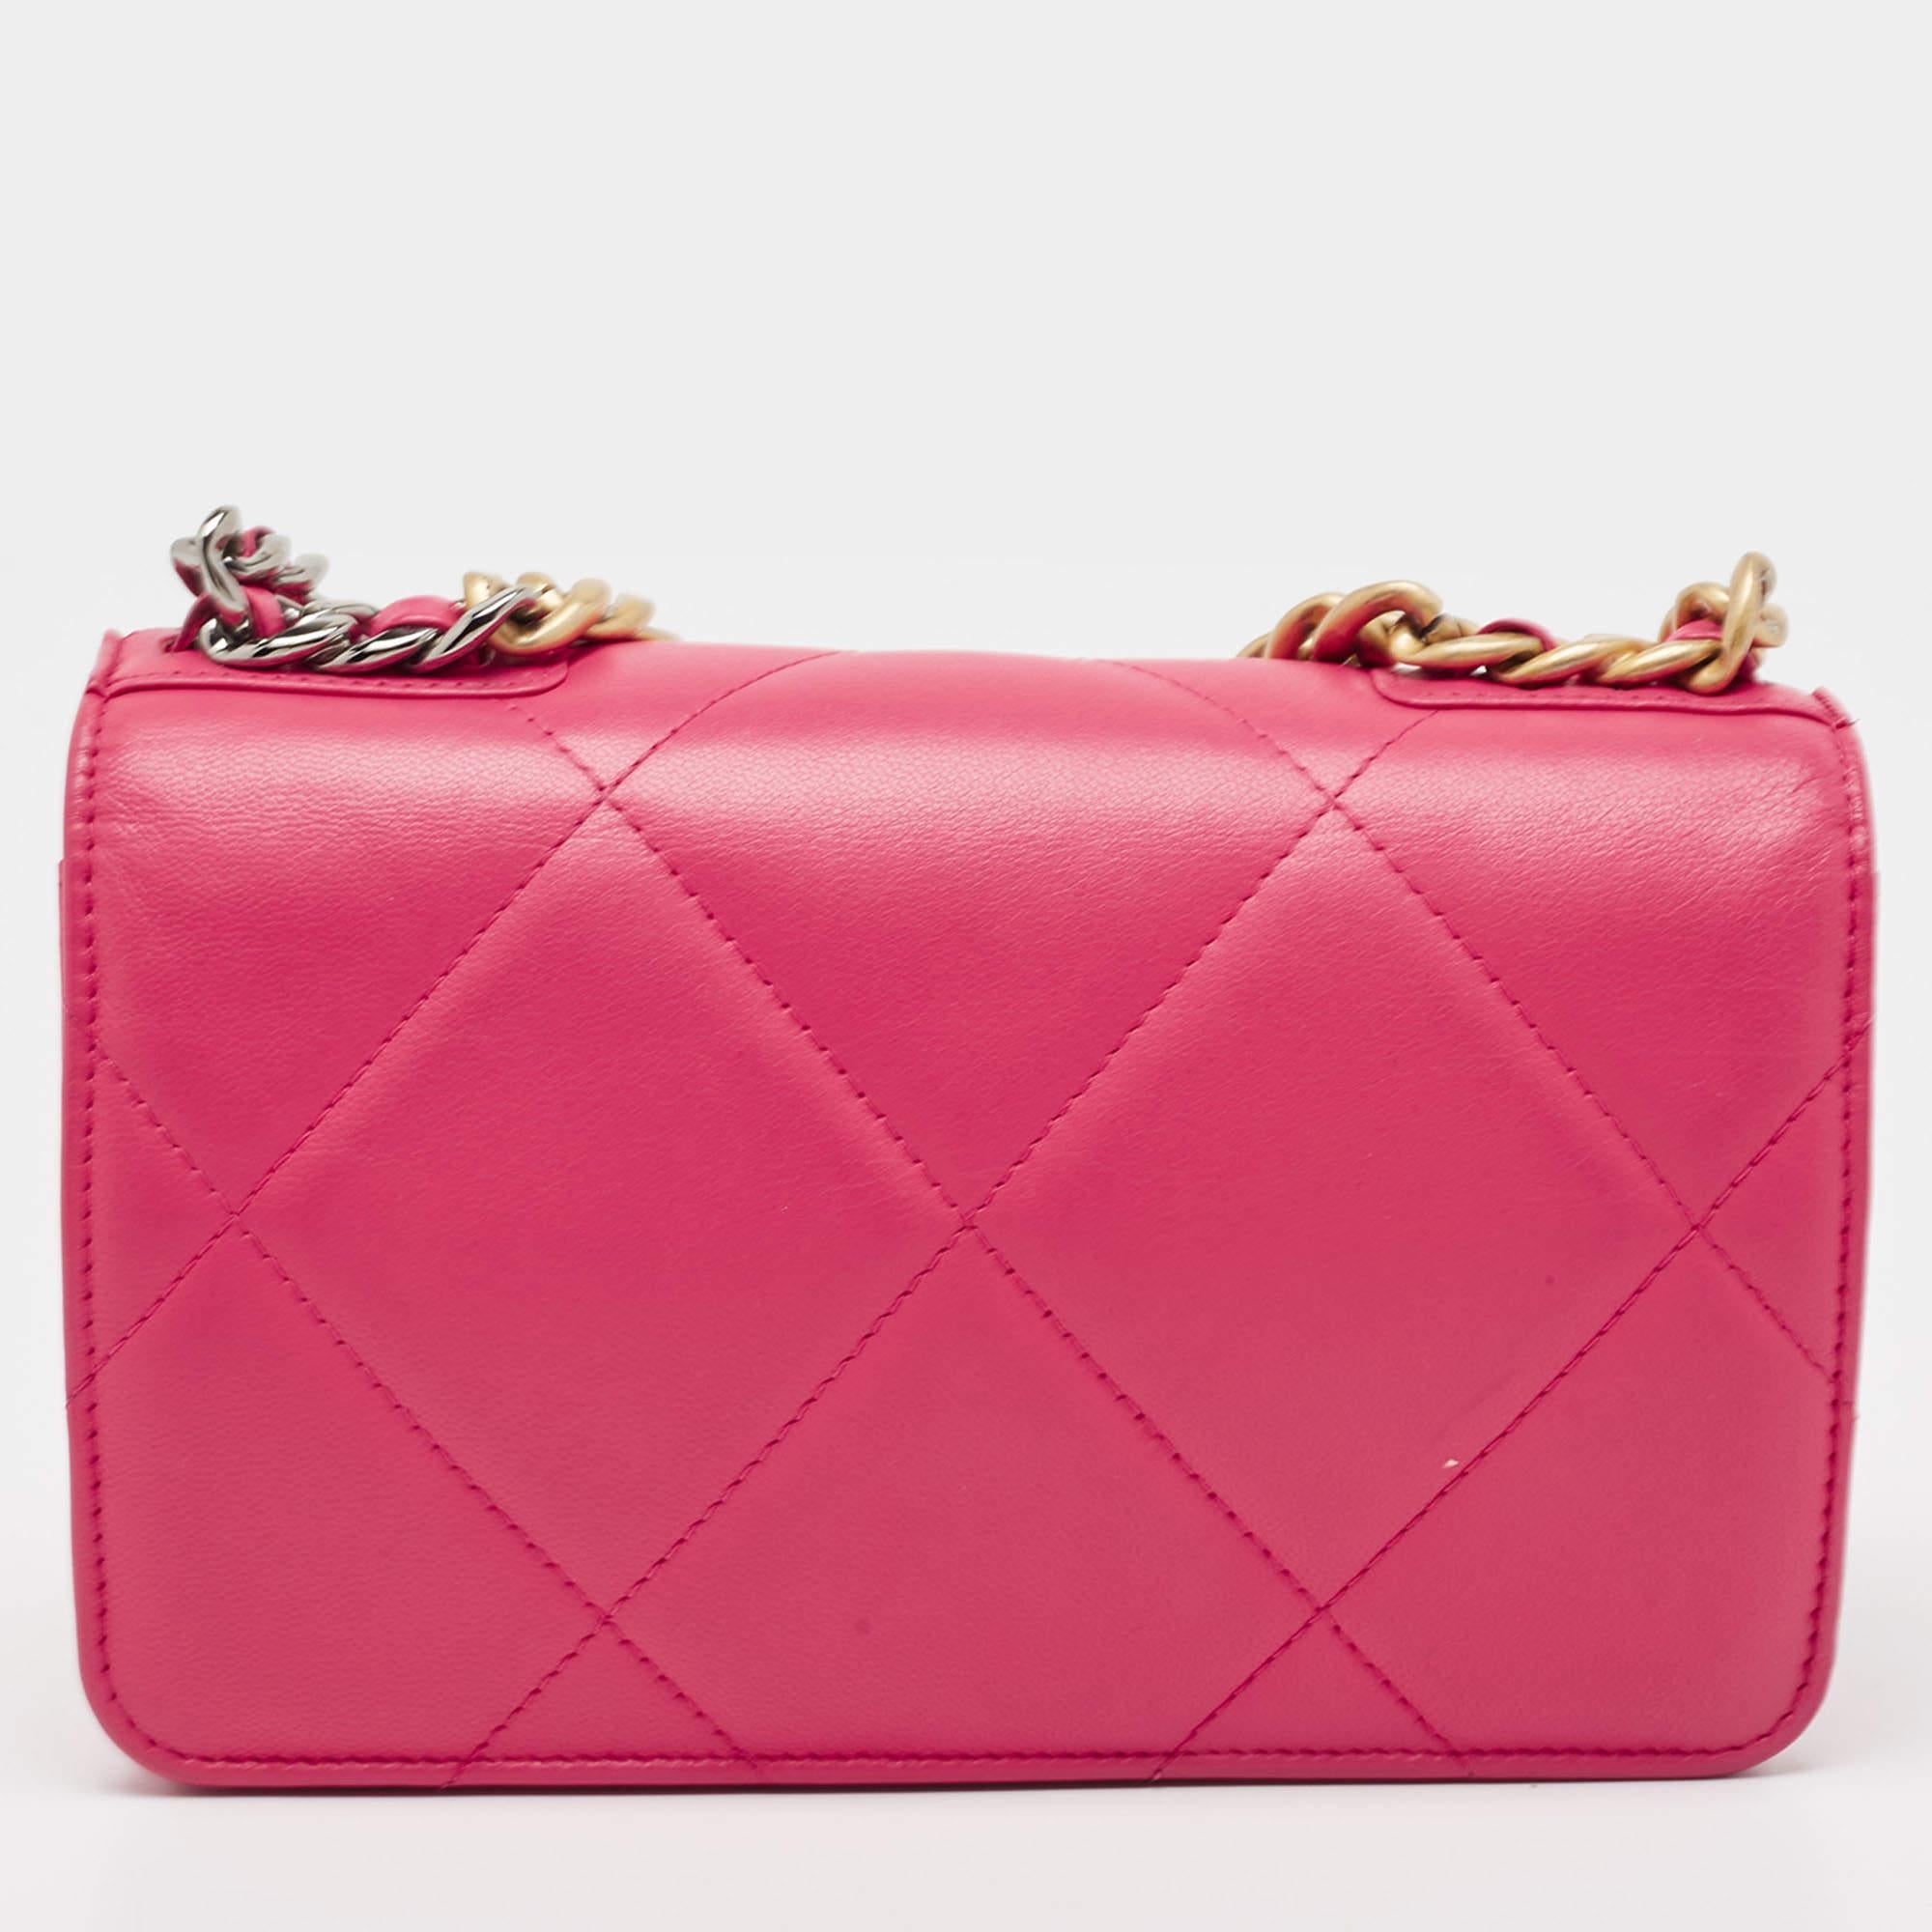 Chanel Pink Quilted Leather Chanel 19 Wallet on Chain 4